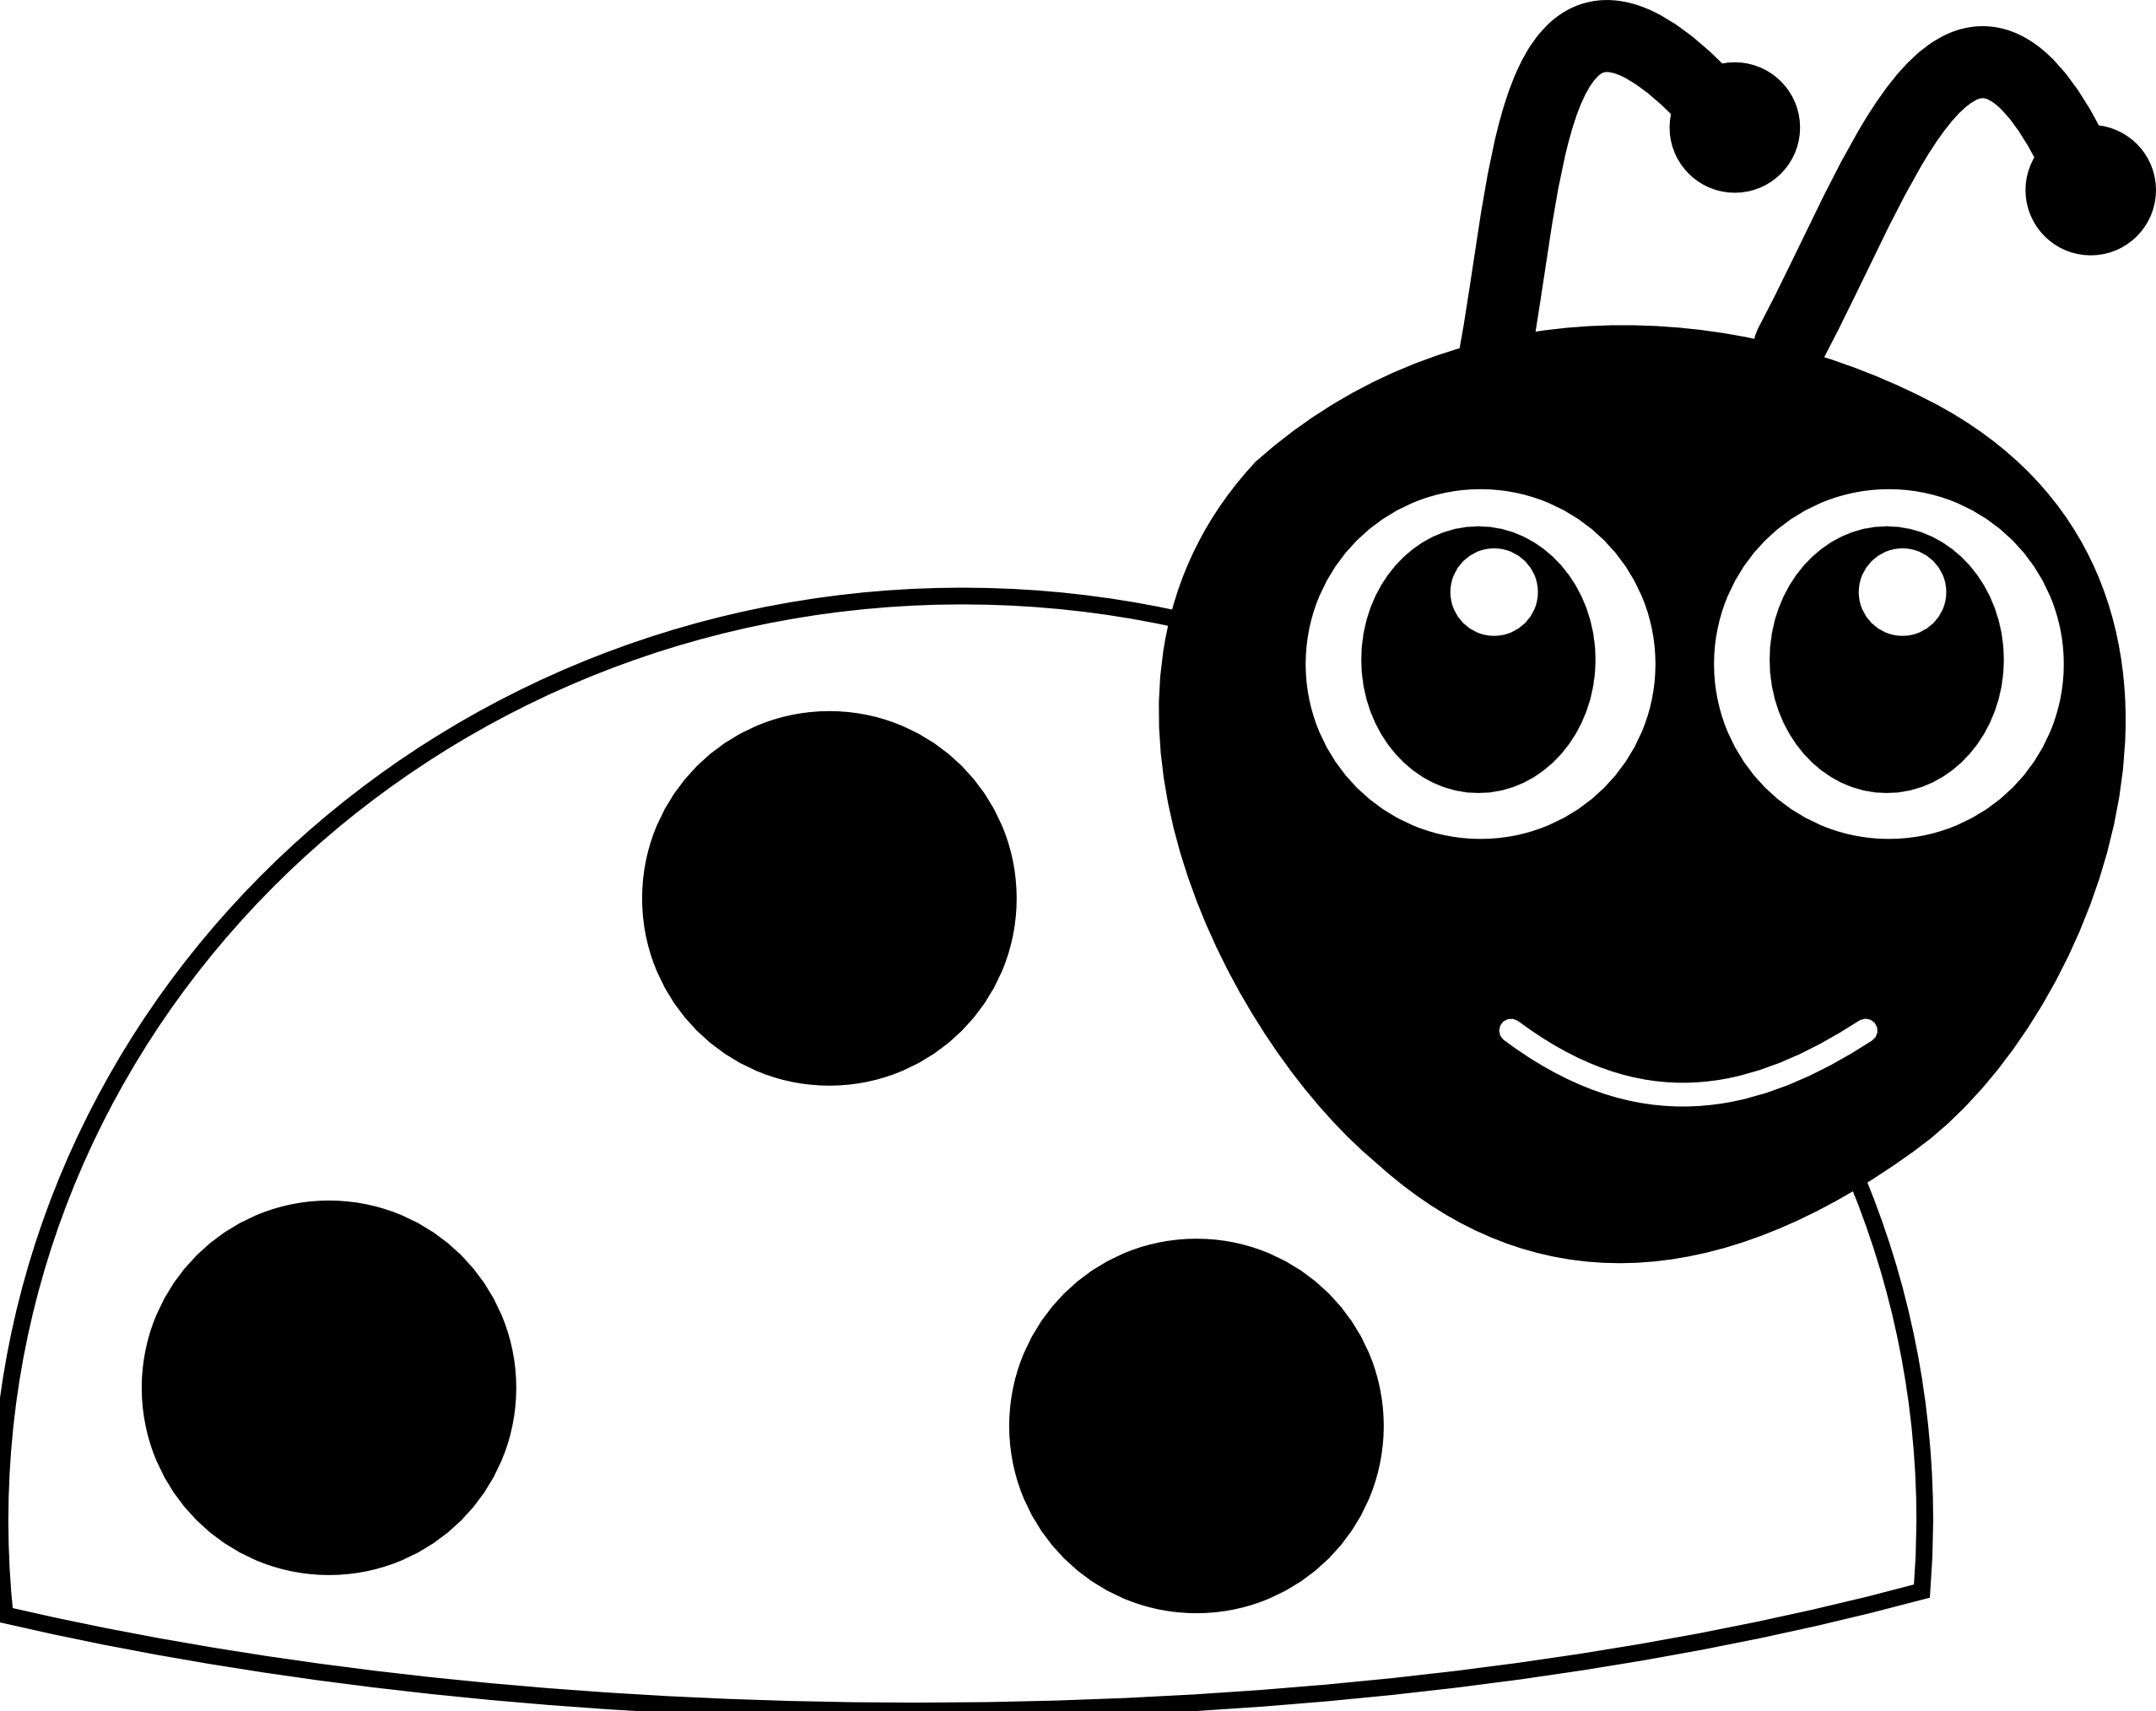 Cute ladybug clipart black and white